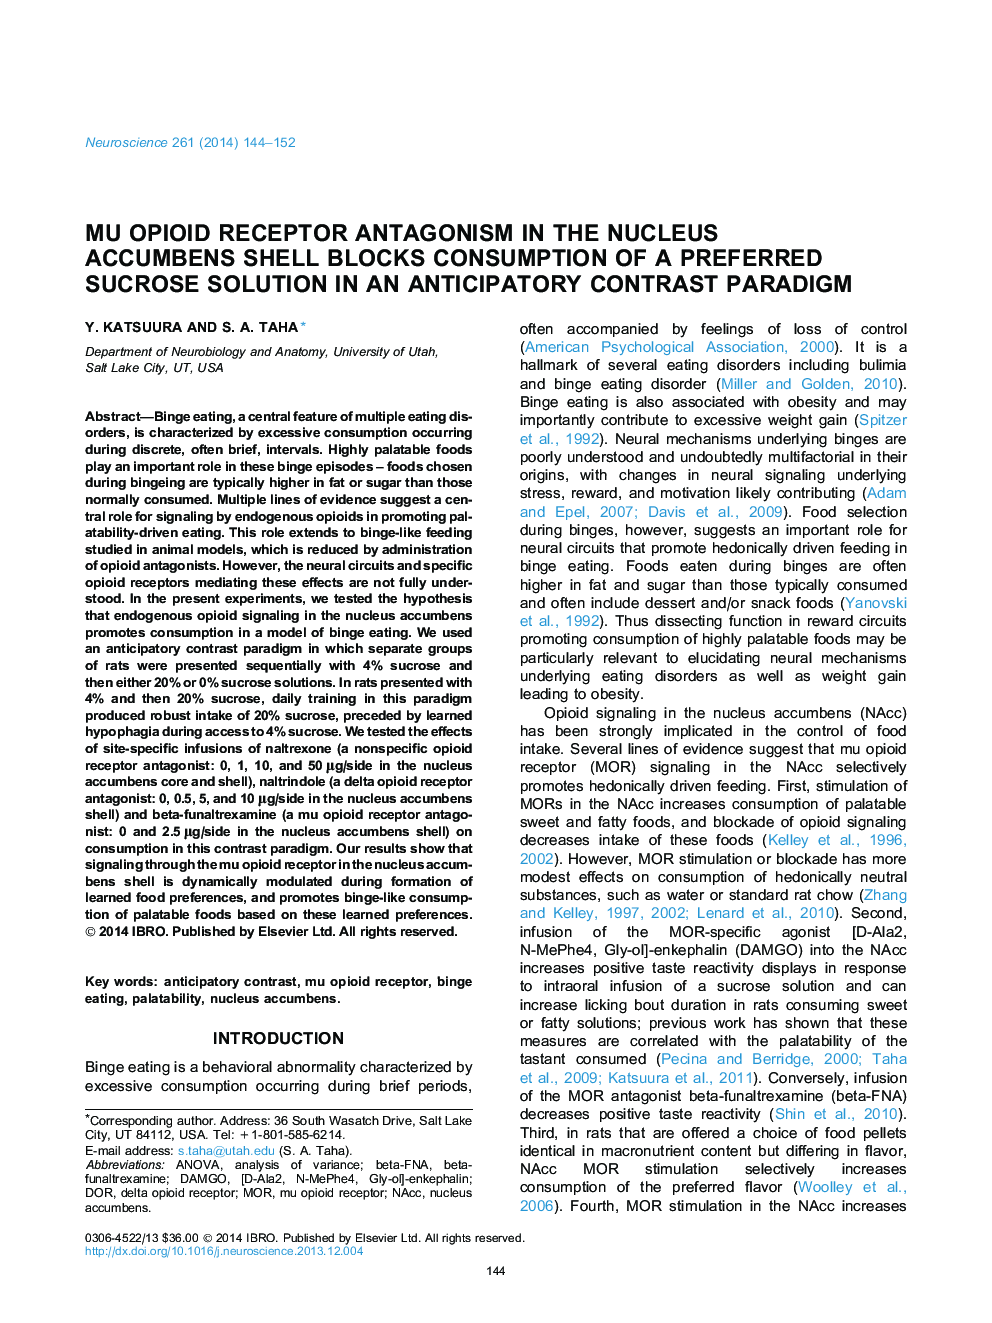 Mu opioid receptor antagonism in the nucleus accumbens shell blocks consumption of a preferred sucrose solution in an anticipatory contrast paradigm